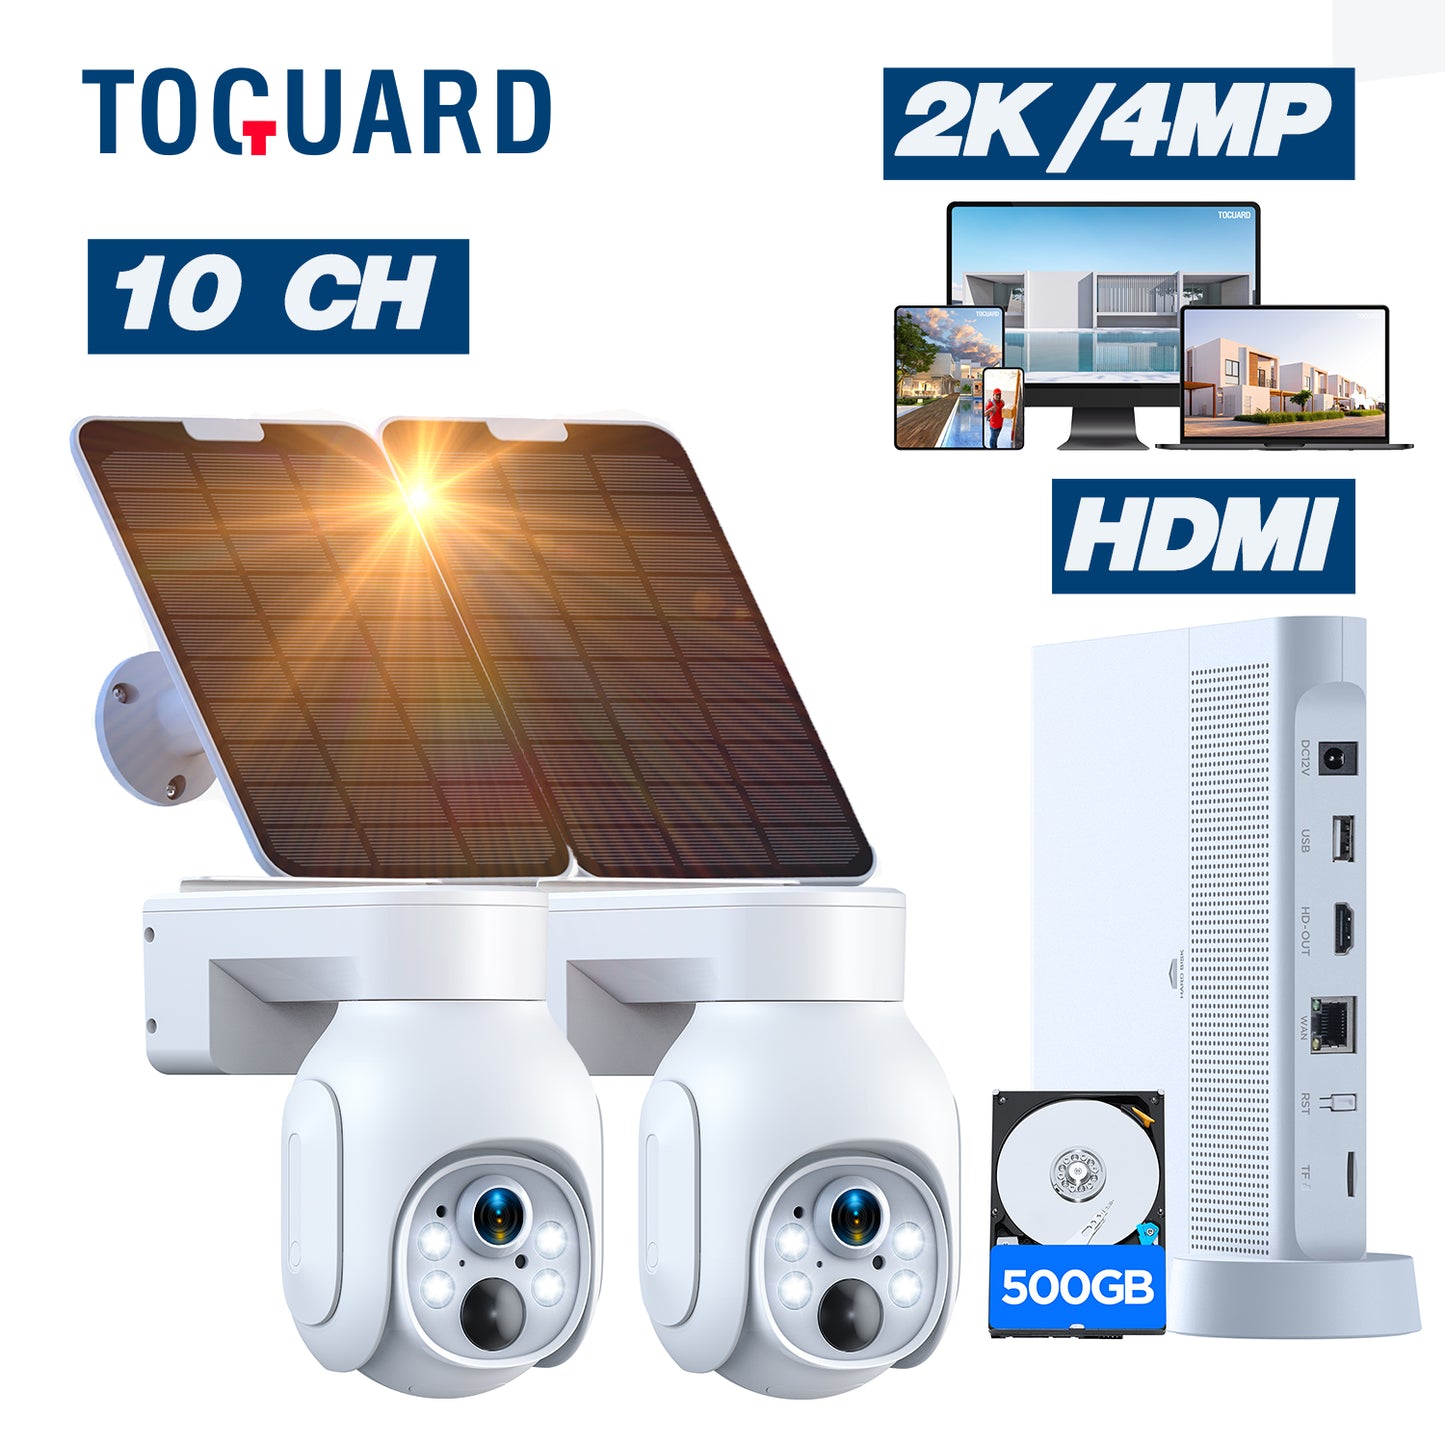 TOGUARD SC23 10CH 4MP Solar Wireless Security Camera System Outdoor Battery WiFi Dome Surveillance Camera NVR HDMI Connector